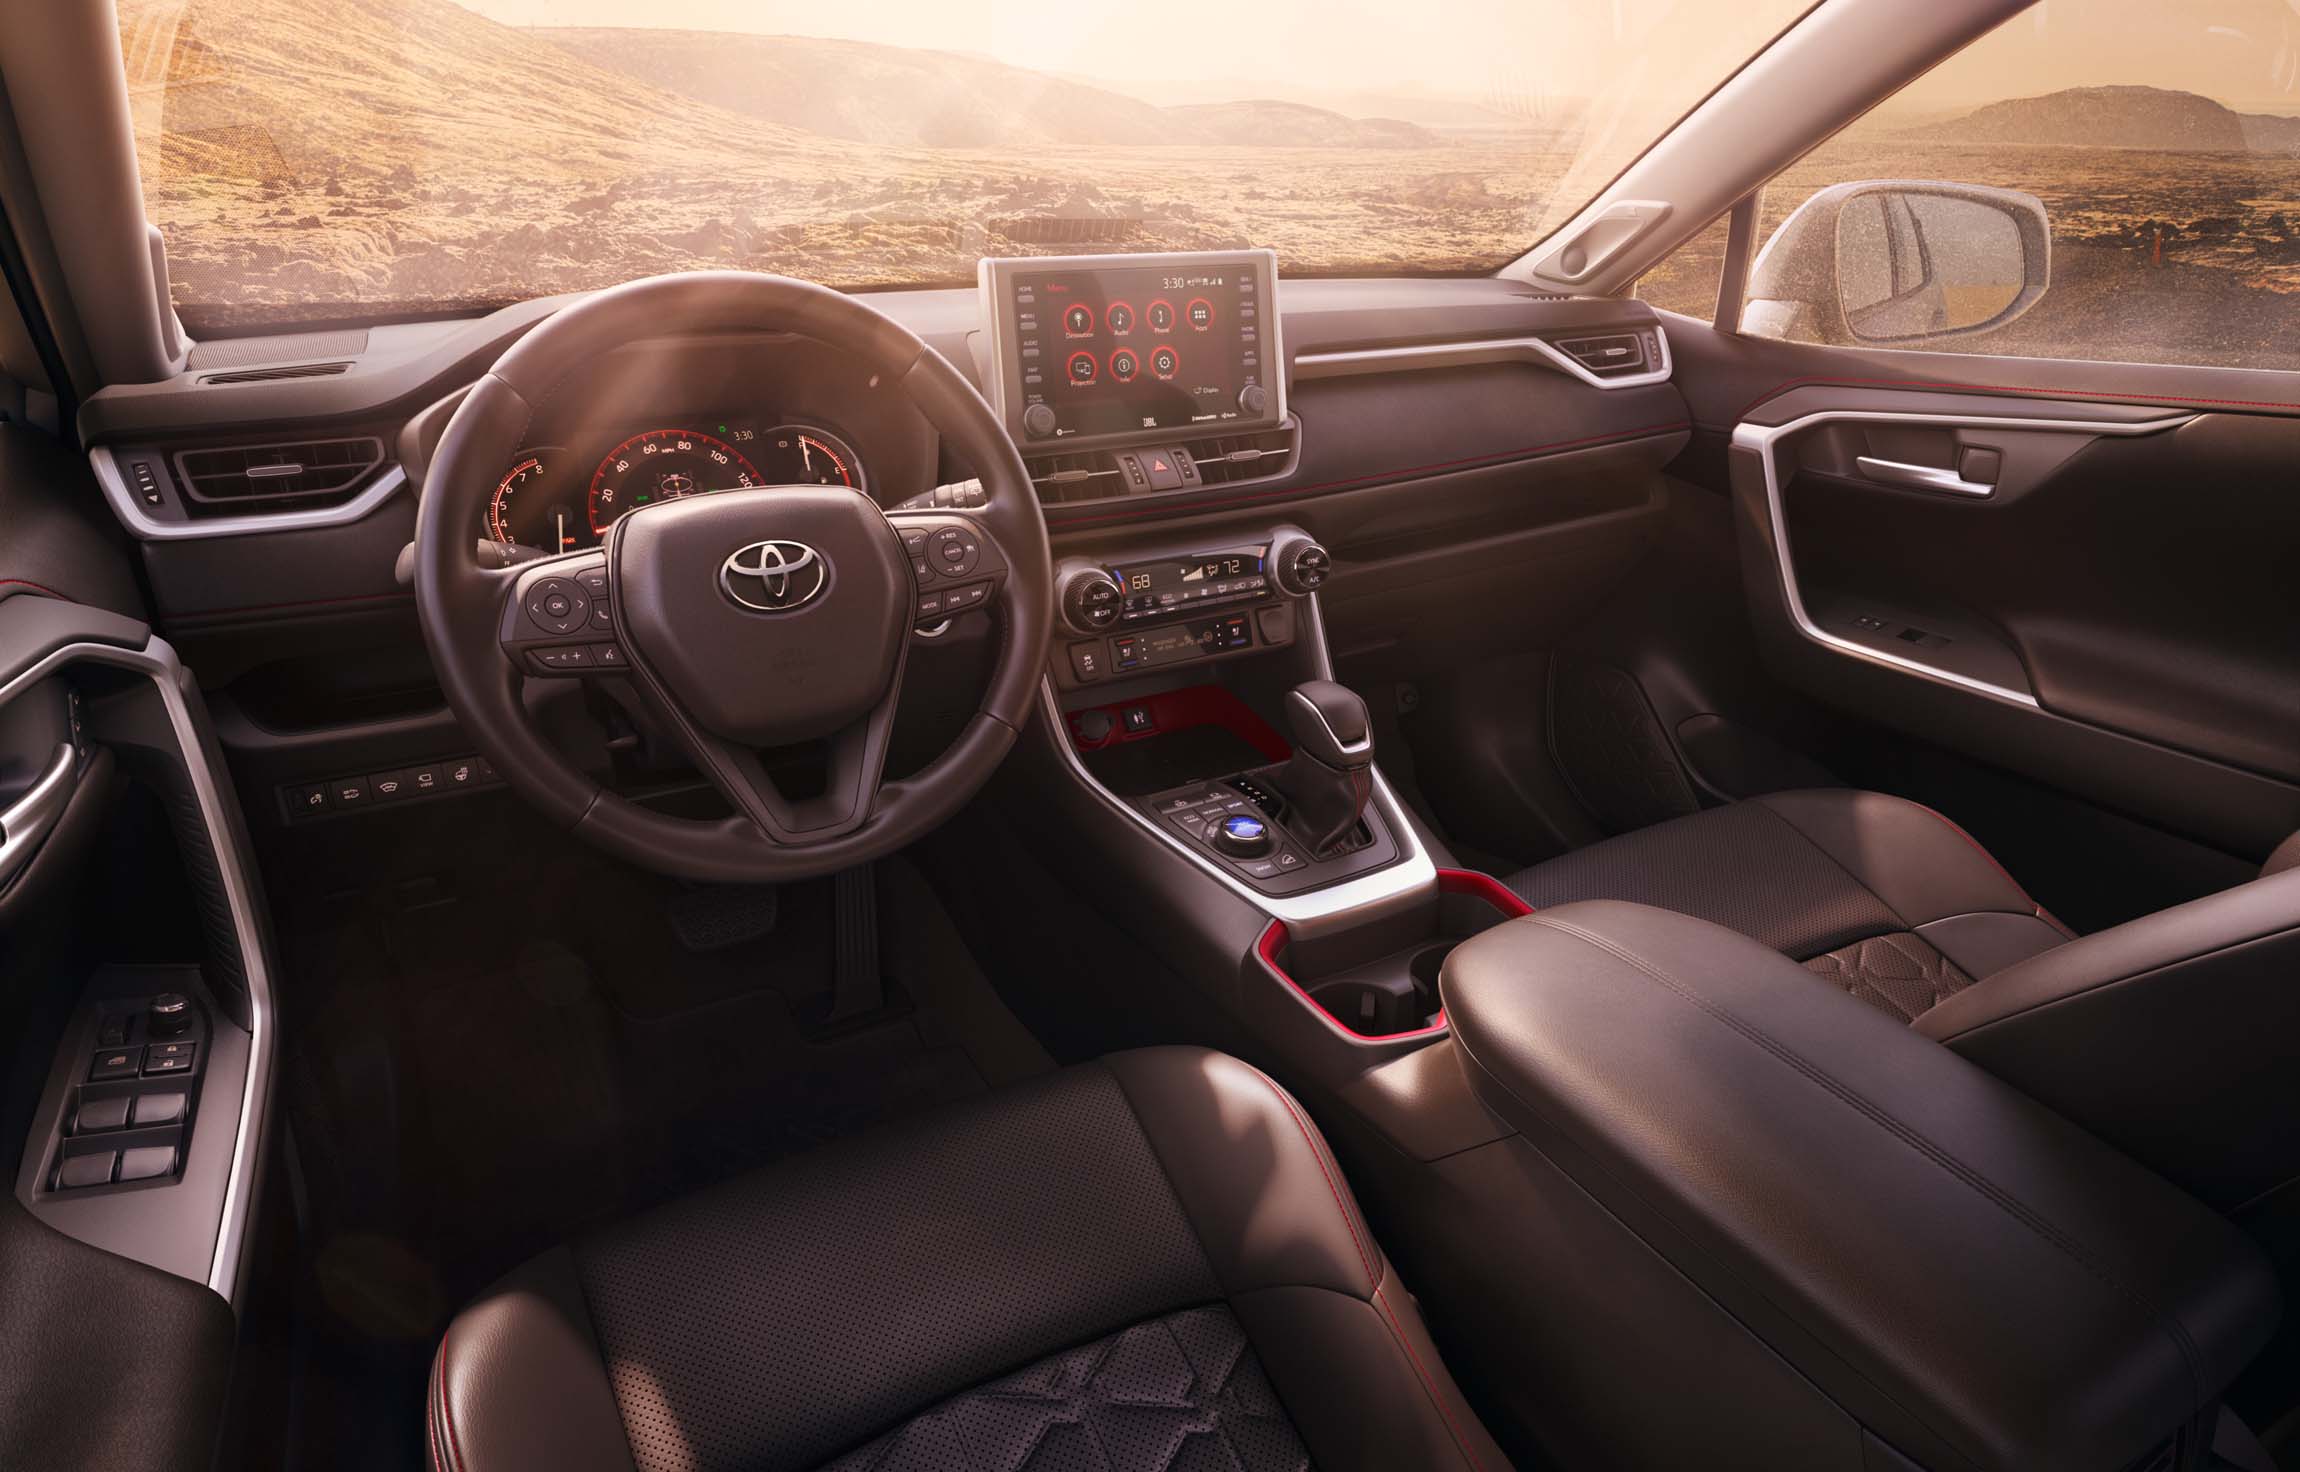 2020 Toyota Rav4 Finally Comes With Android Auto